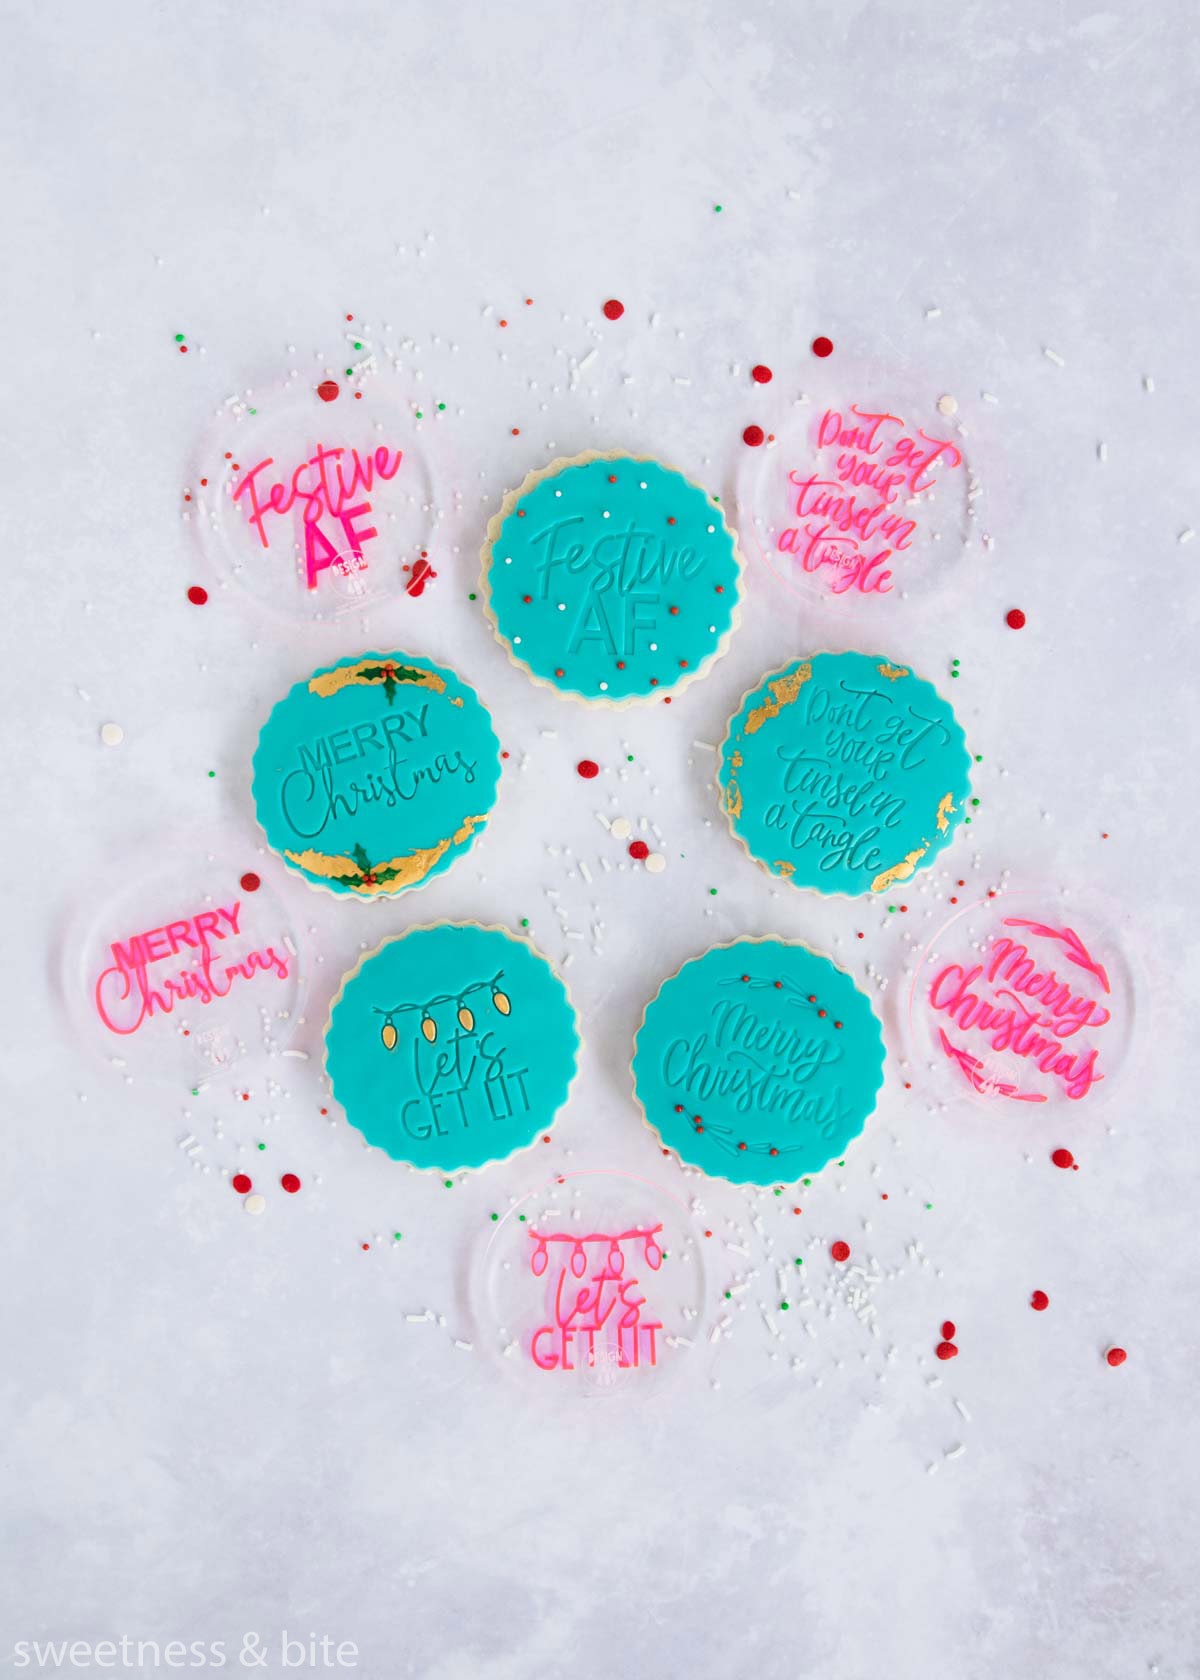 Round cookies decorated with teal fondant circles embossed with messages - Festive AF, Don't get your tinsel in a tangle, Merry Christmas and Let's get lit.